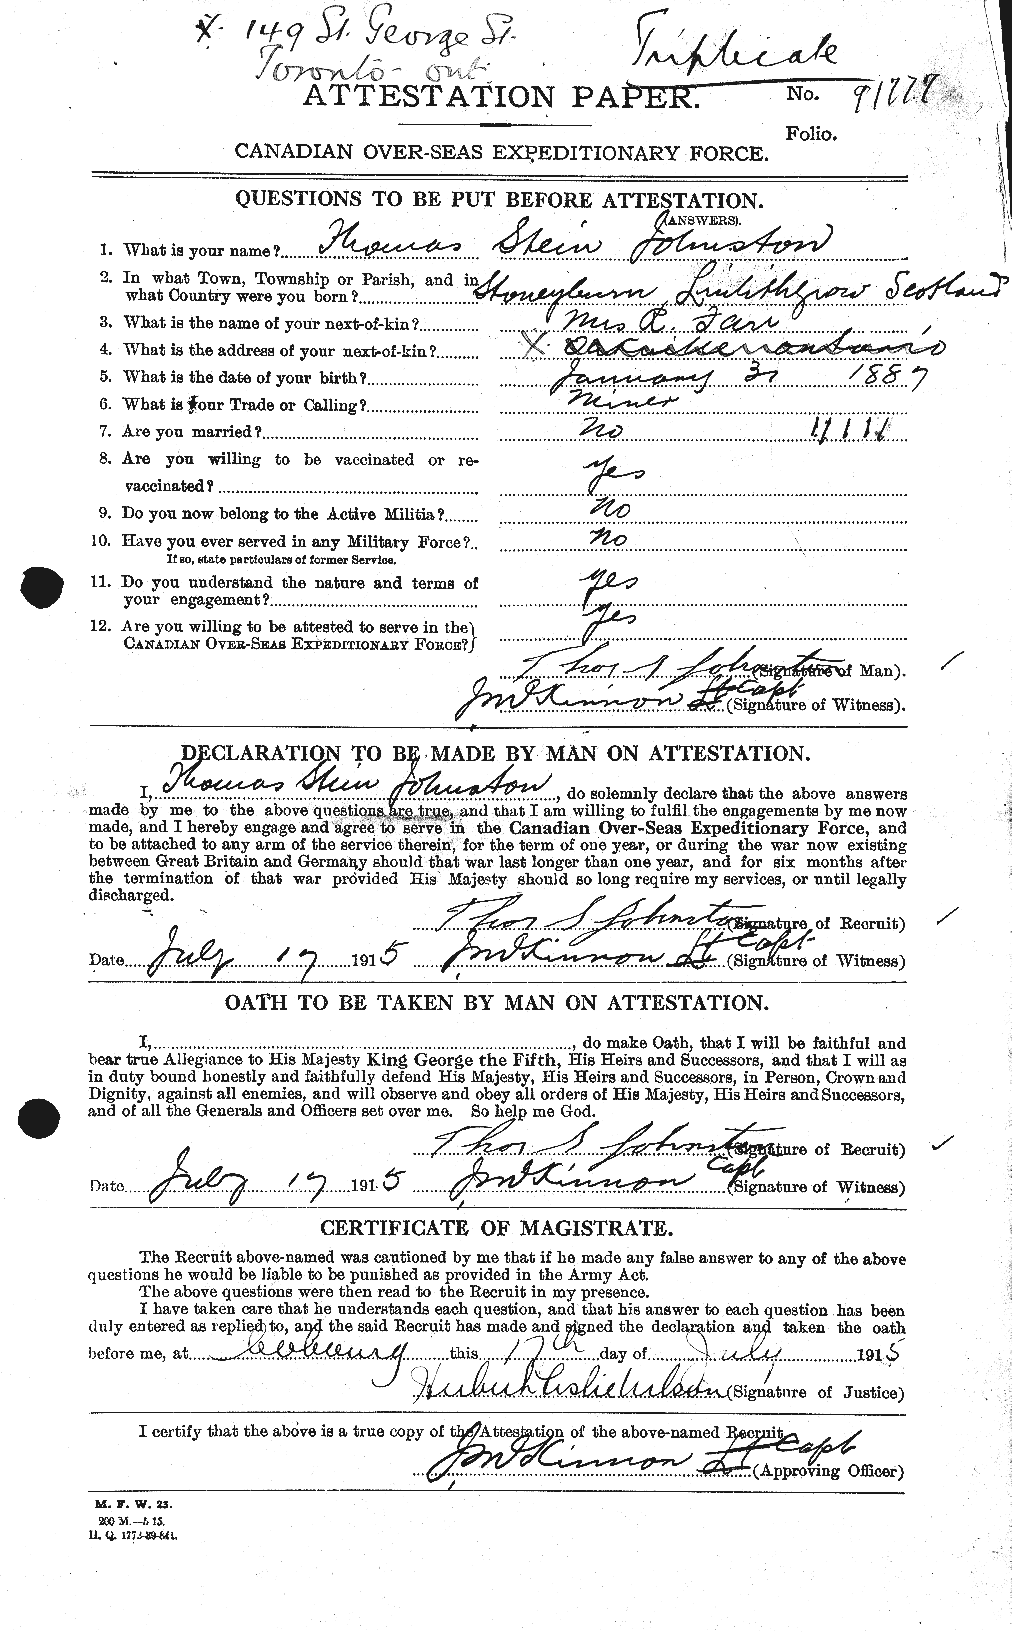 Personnel Records of the First World War - CEF 427175a